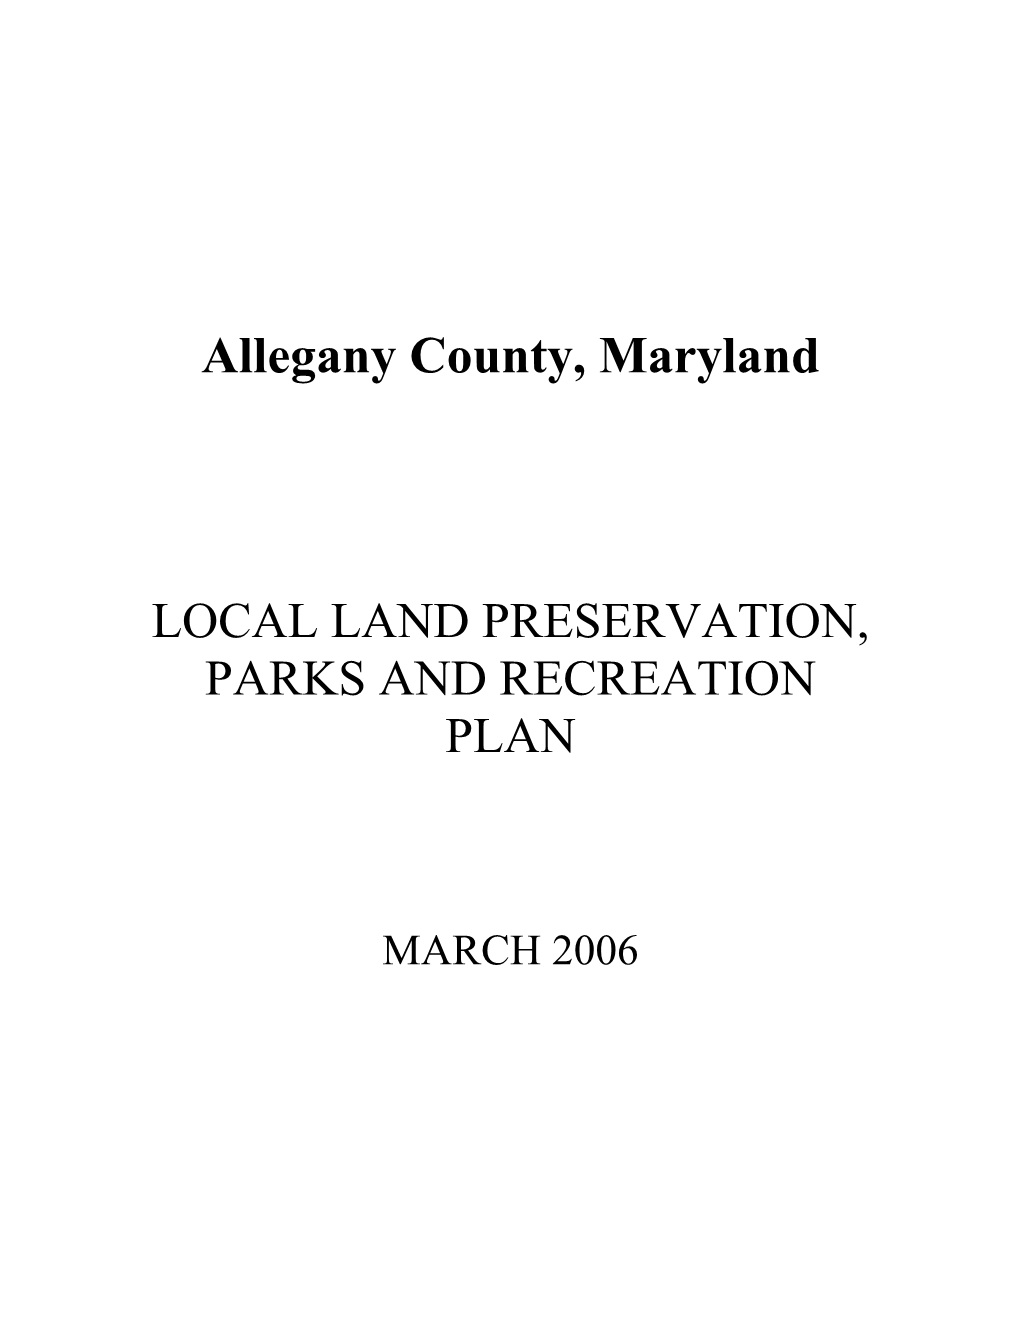 Allegany County Local Land Preservation